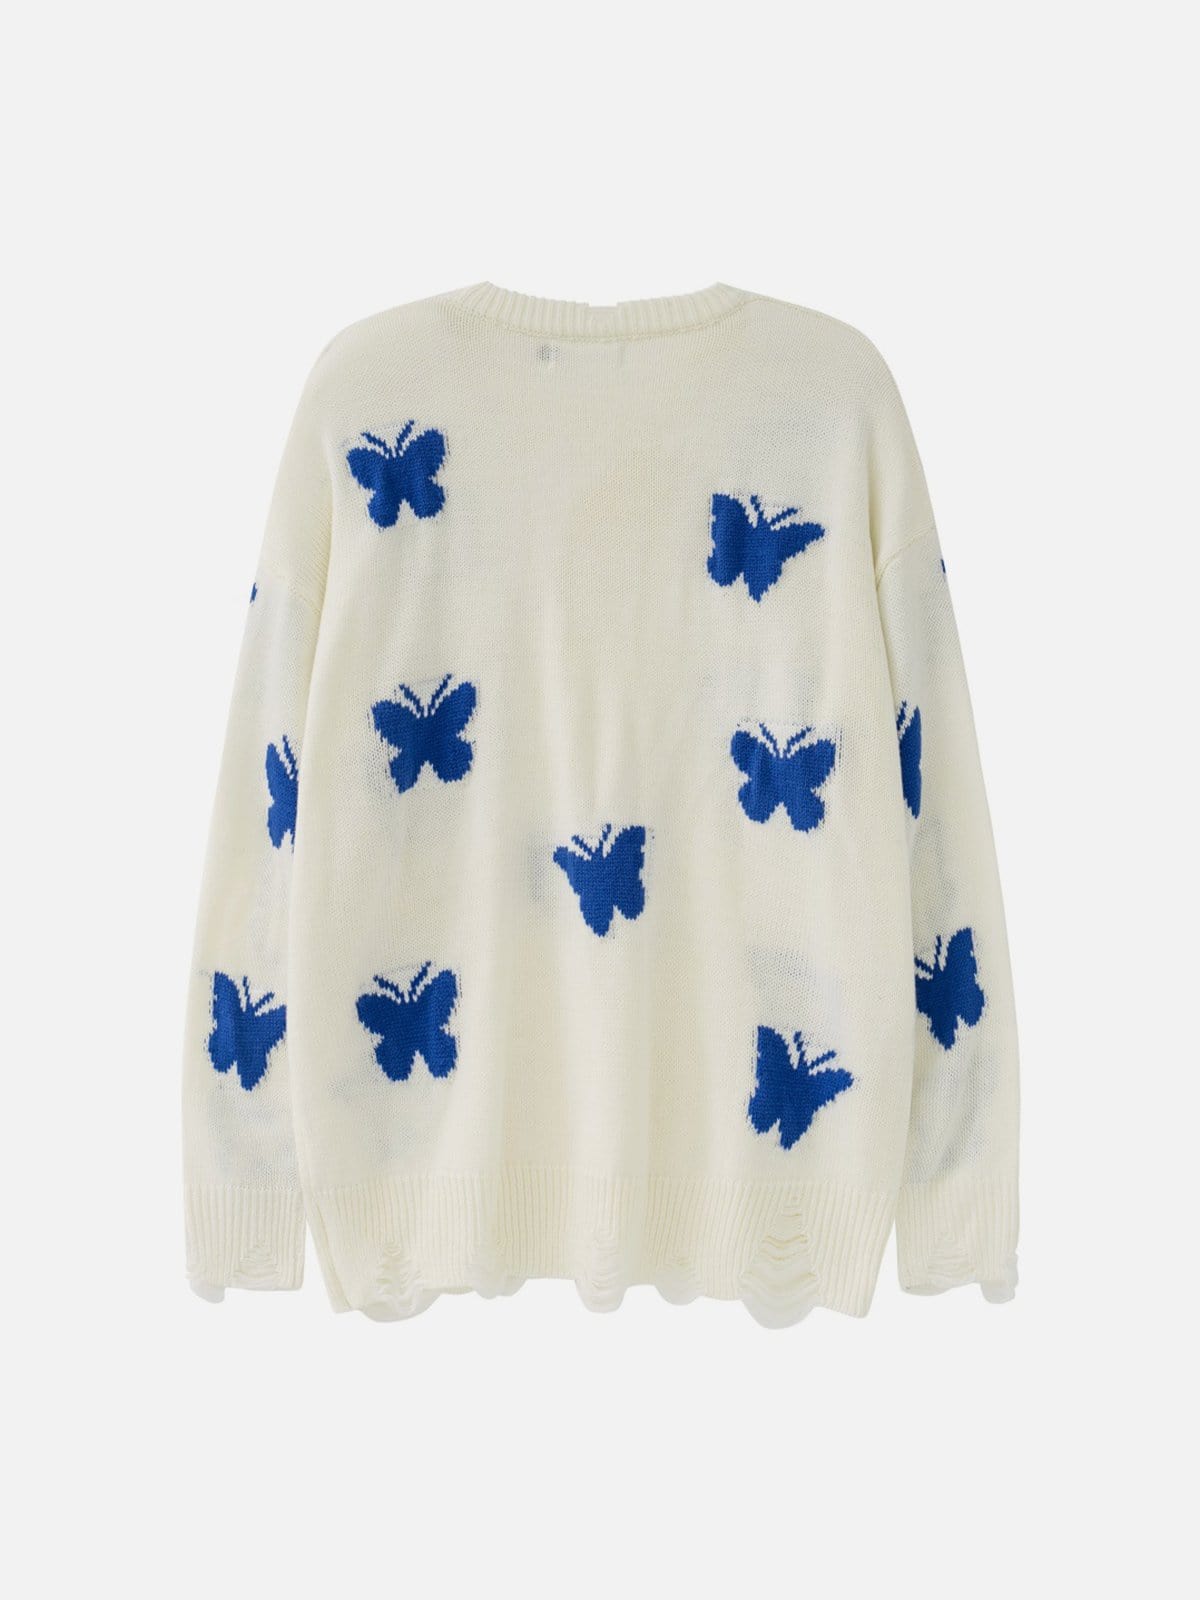 Full Print Butterfly Sweater